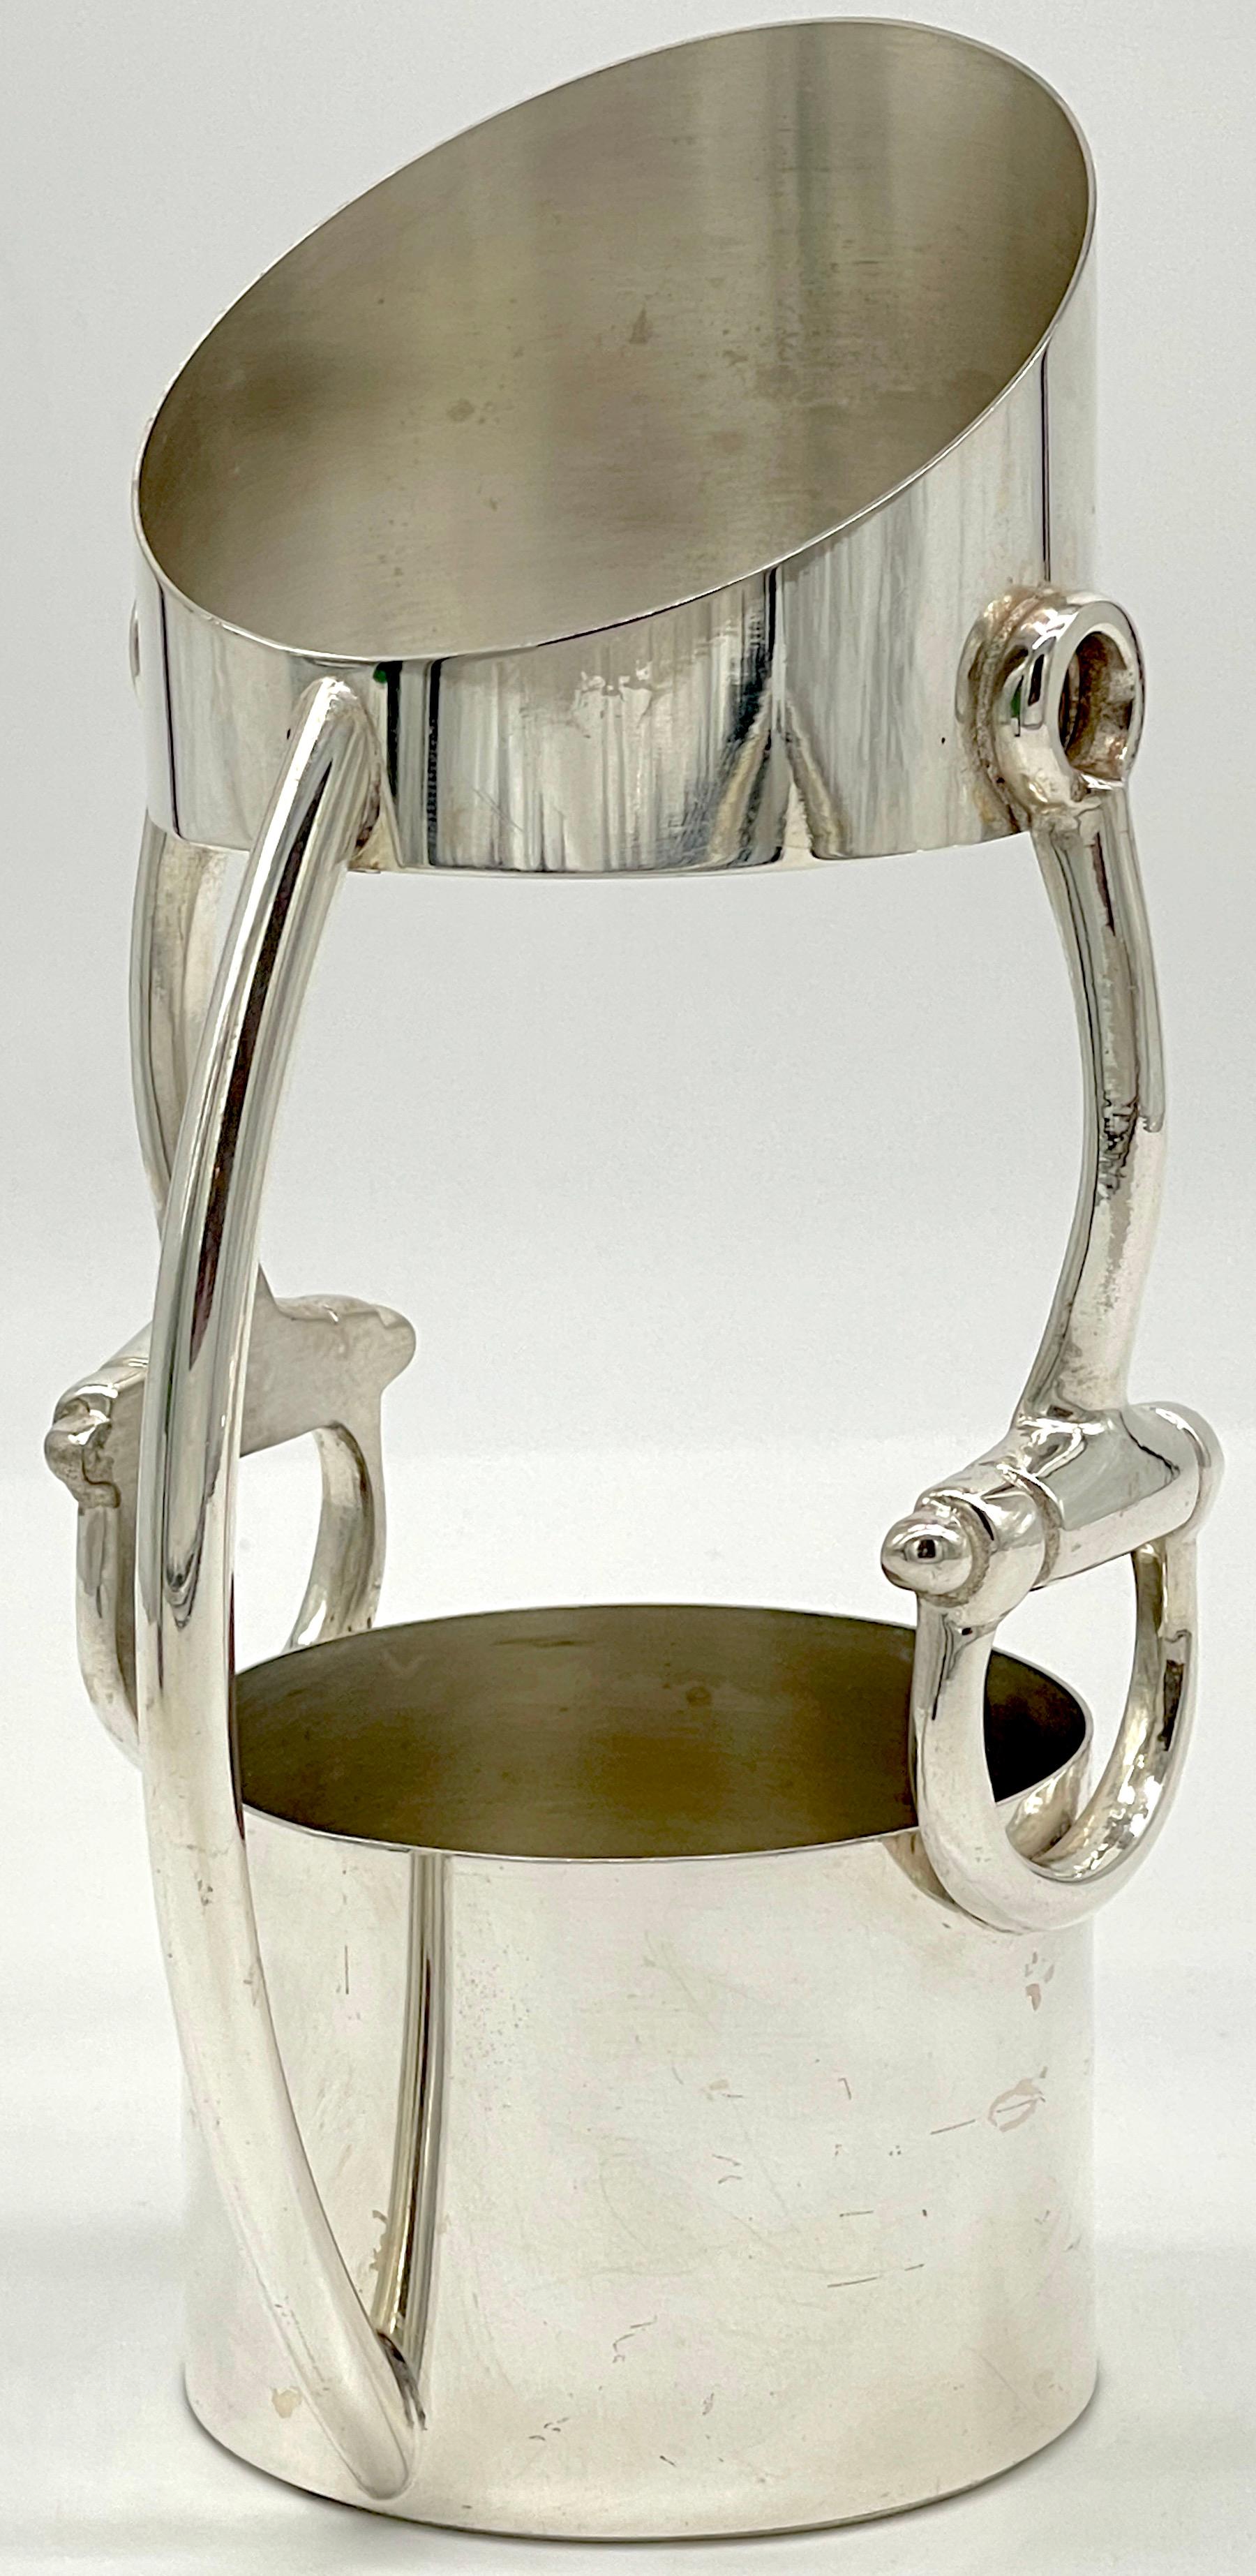 20th Century Gucci Silver Plated Equestrian/ Horsebit Bottle Caddy/ Holder